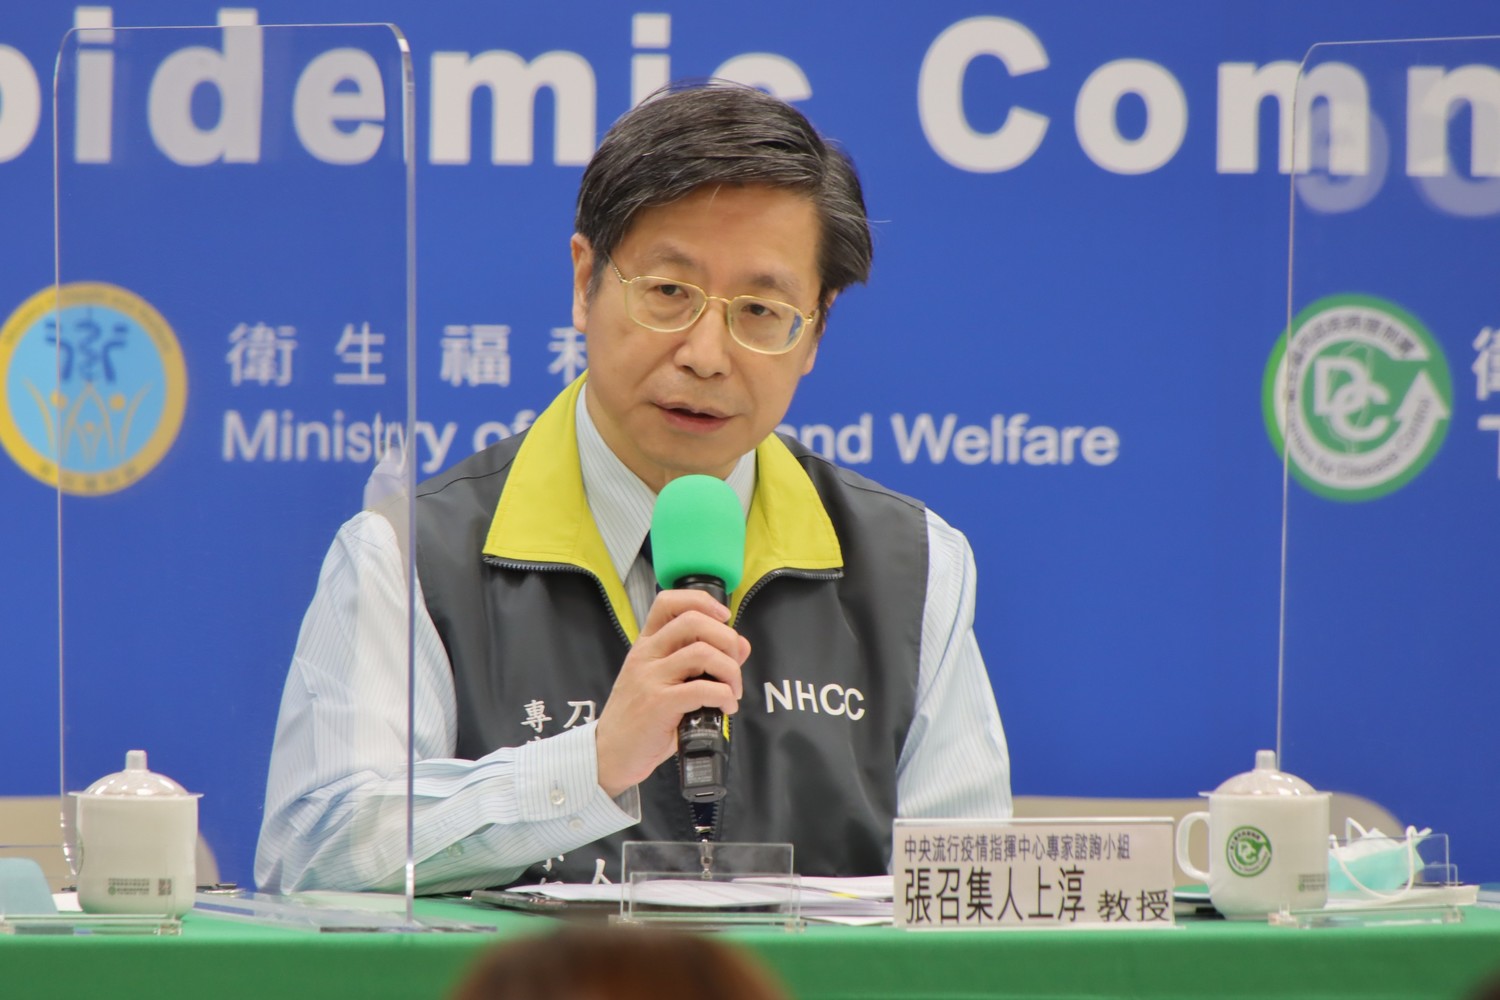 Zhang Shangchun, coordinator of the command center expert advisory group.  Image: Central Outbreak Command Center / provided